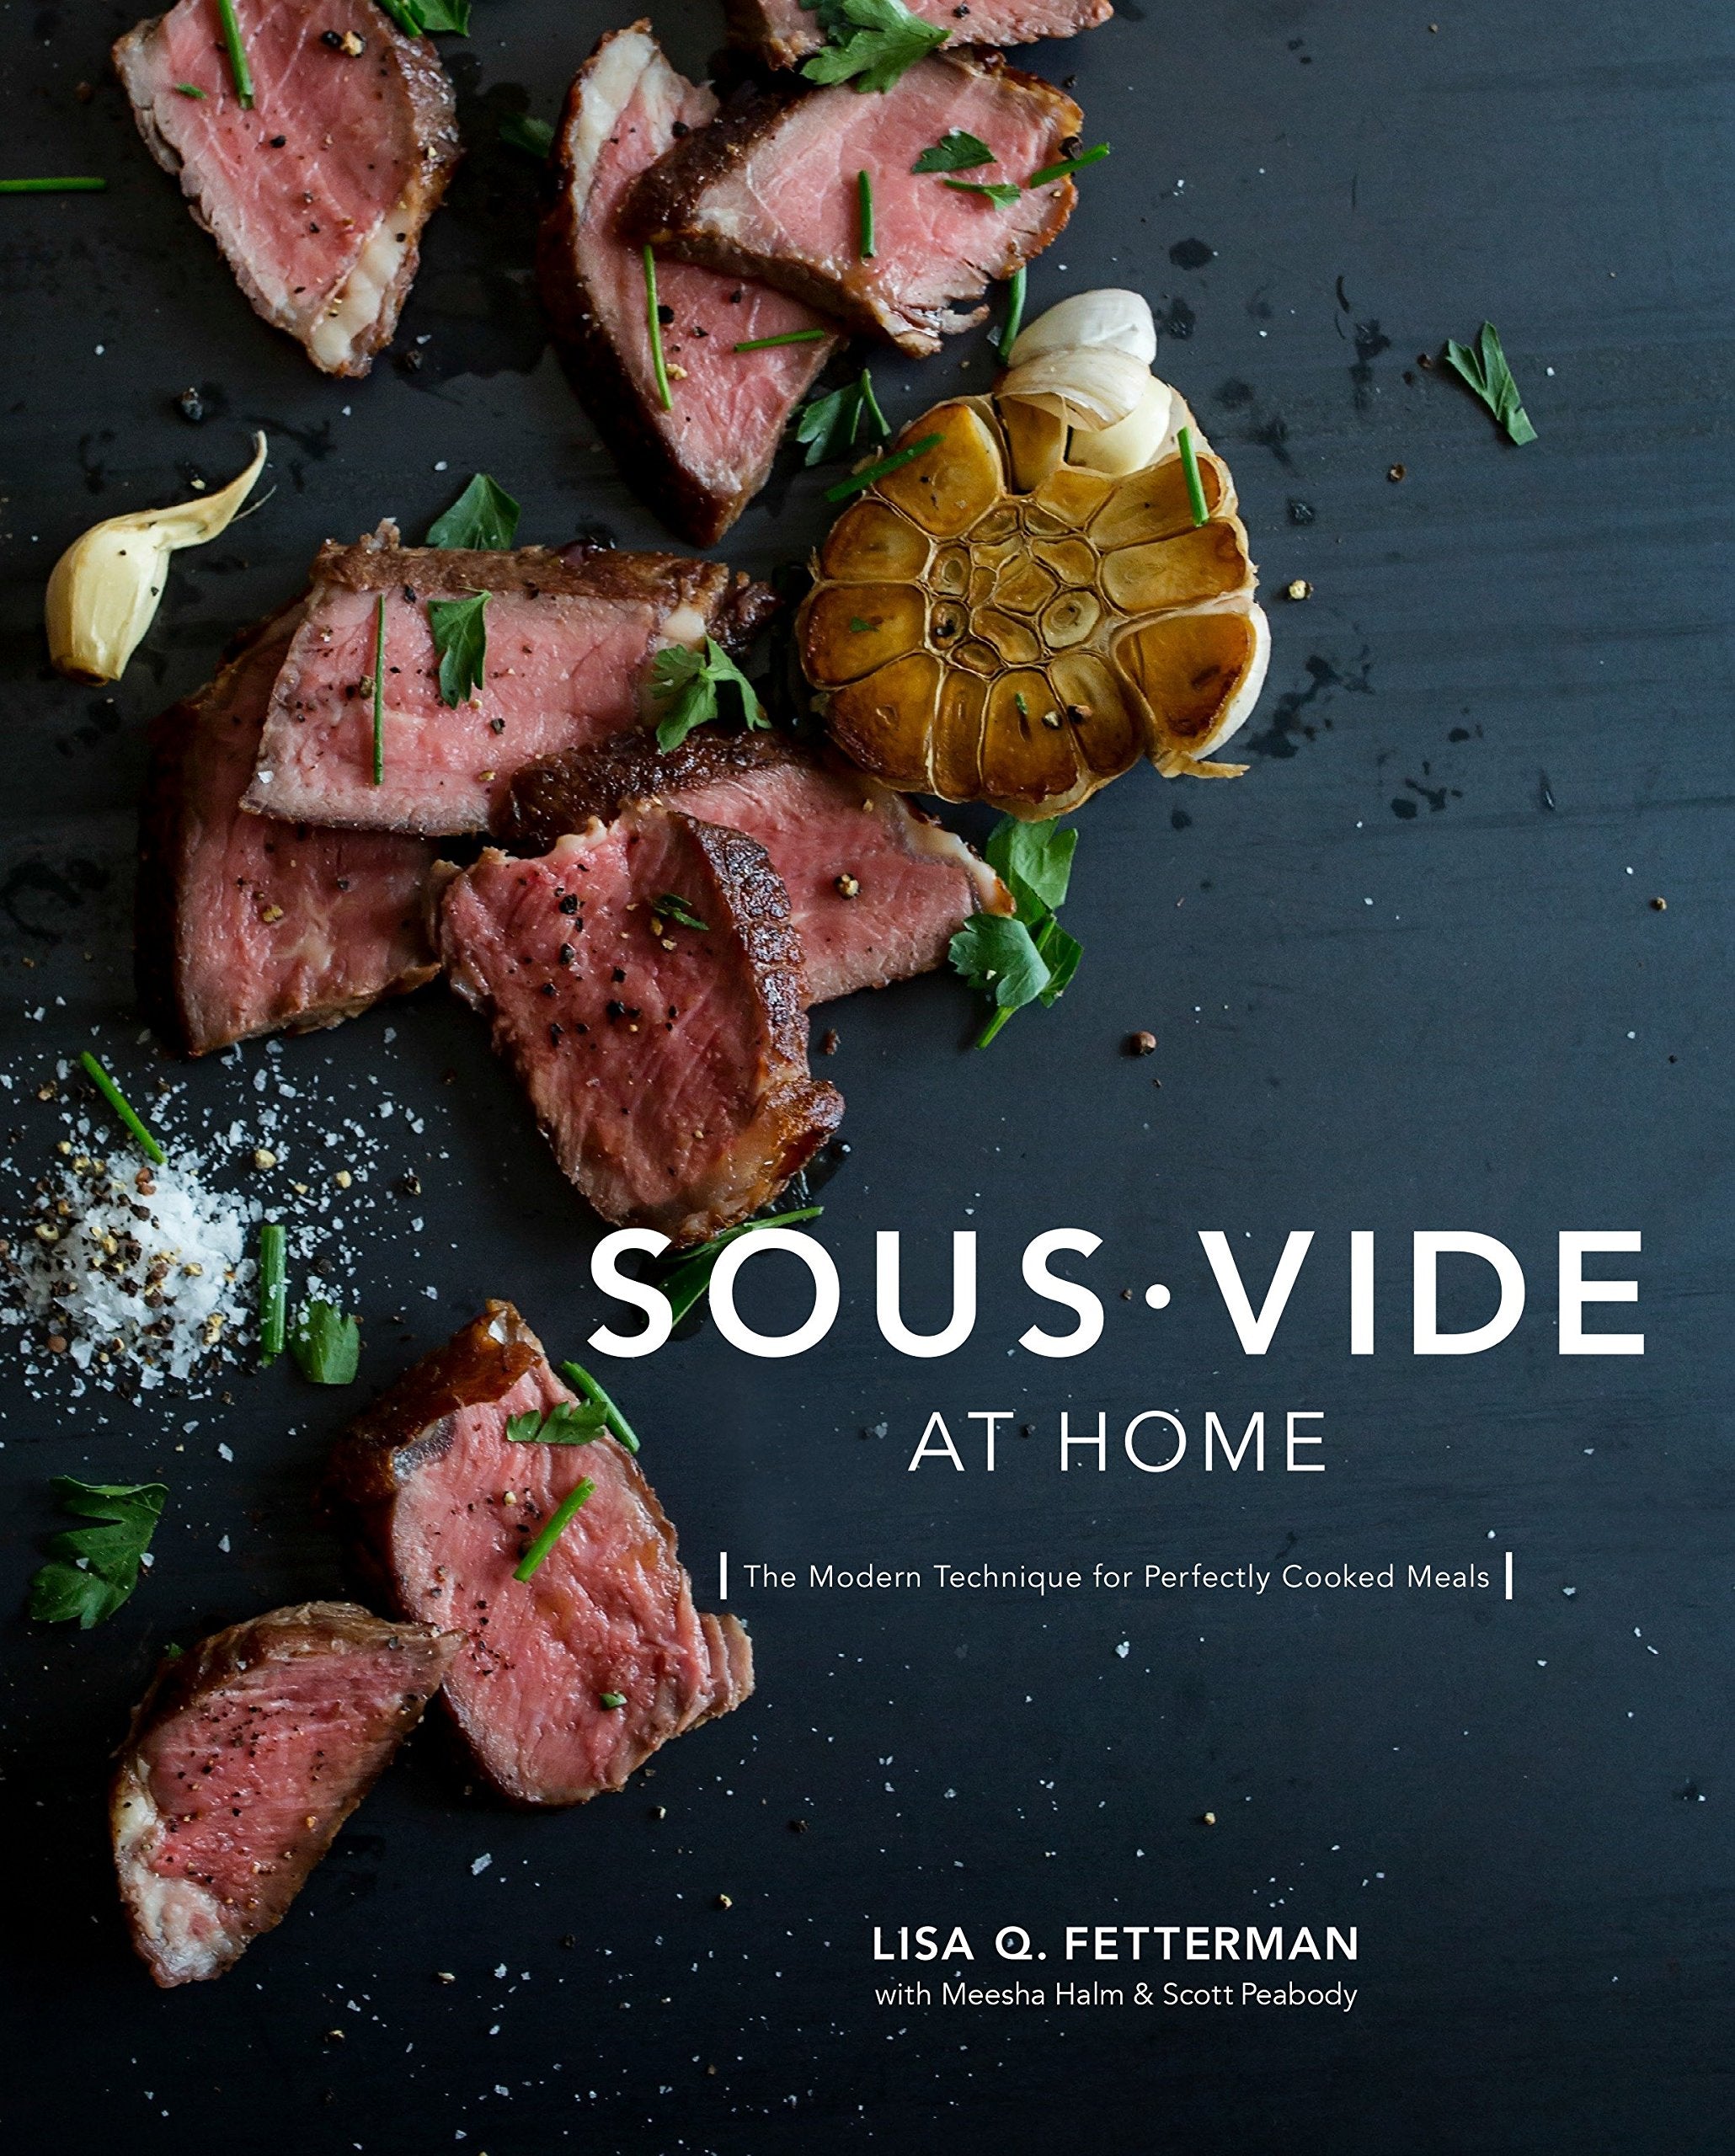 Sous Vide at Home: The Modern Technique for Perfectly Cooked Meals (Lisa Q. Fetterman)